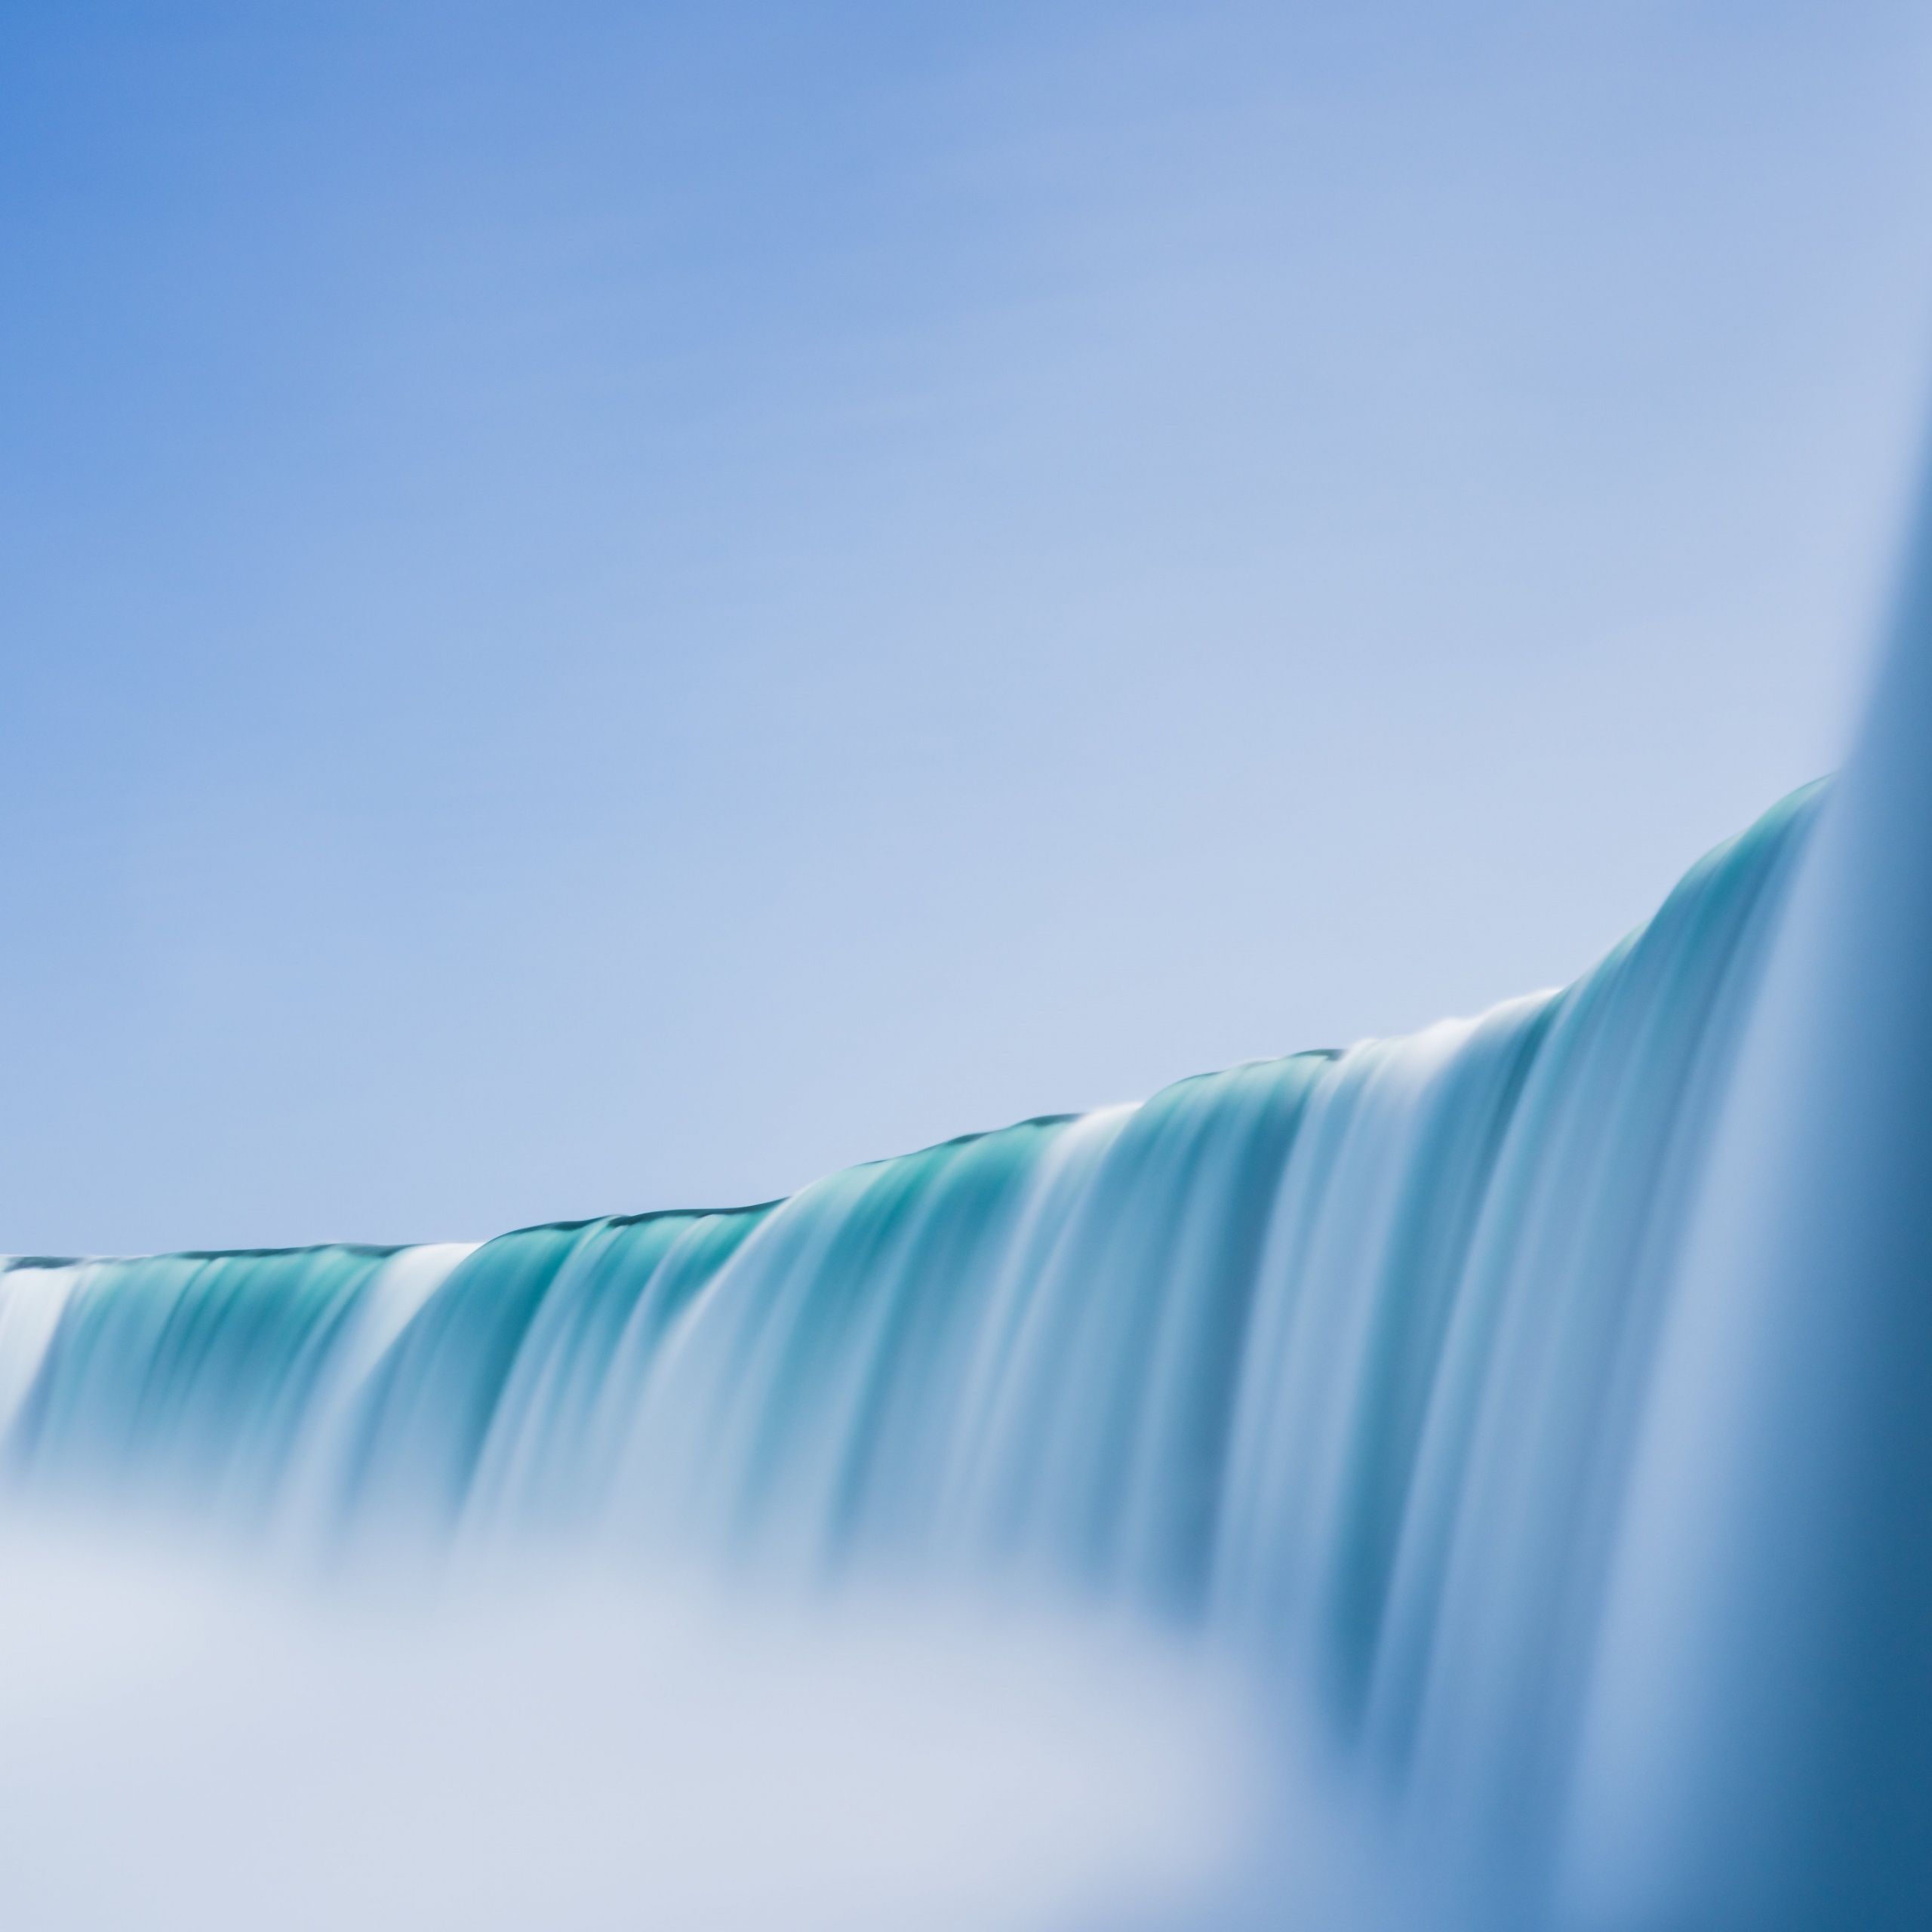 Niagara Falls in the summer with a clear blue sky - Waterfall